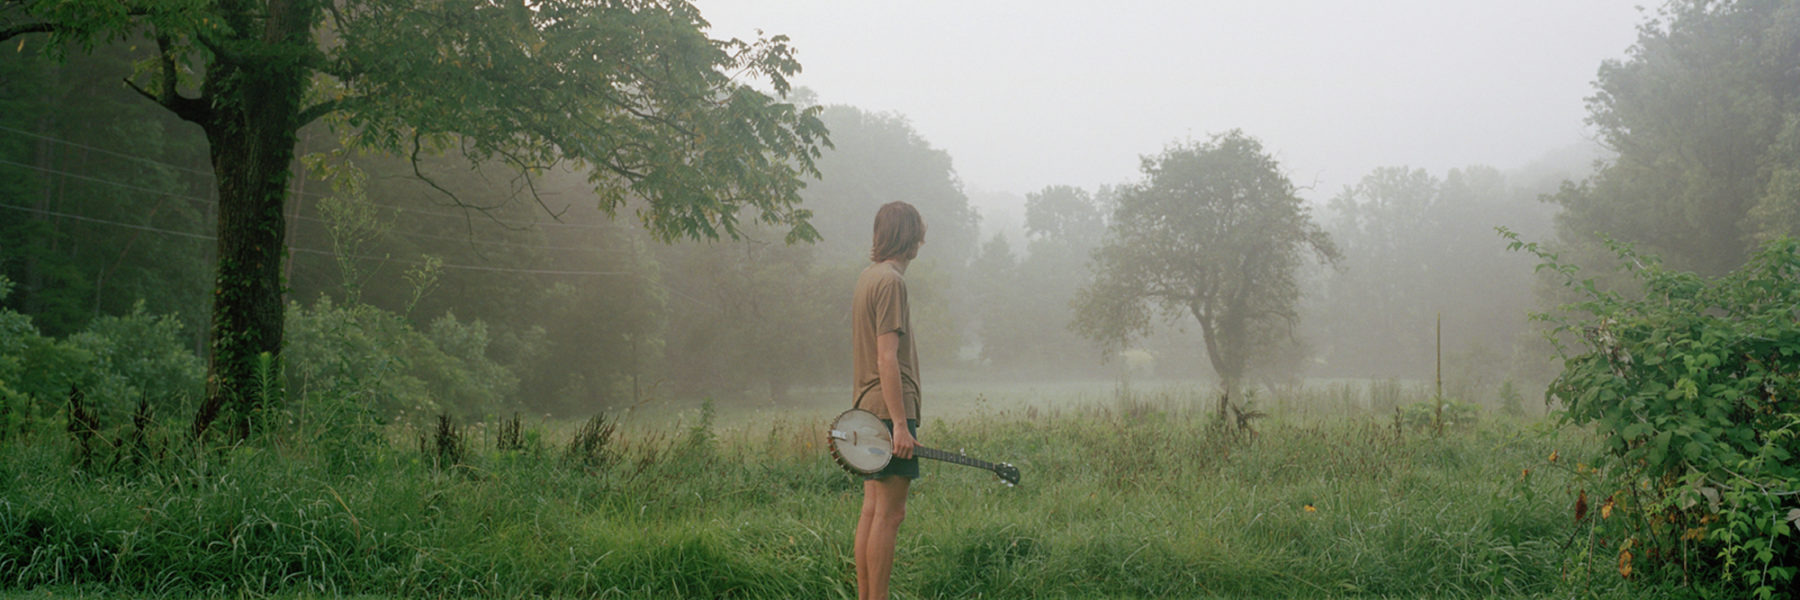 white man stands with alone in a hazy field dotted with trees. He holds a banjo and has his back turned toward the camera.